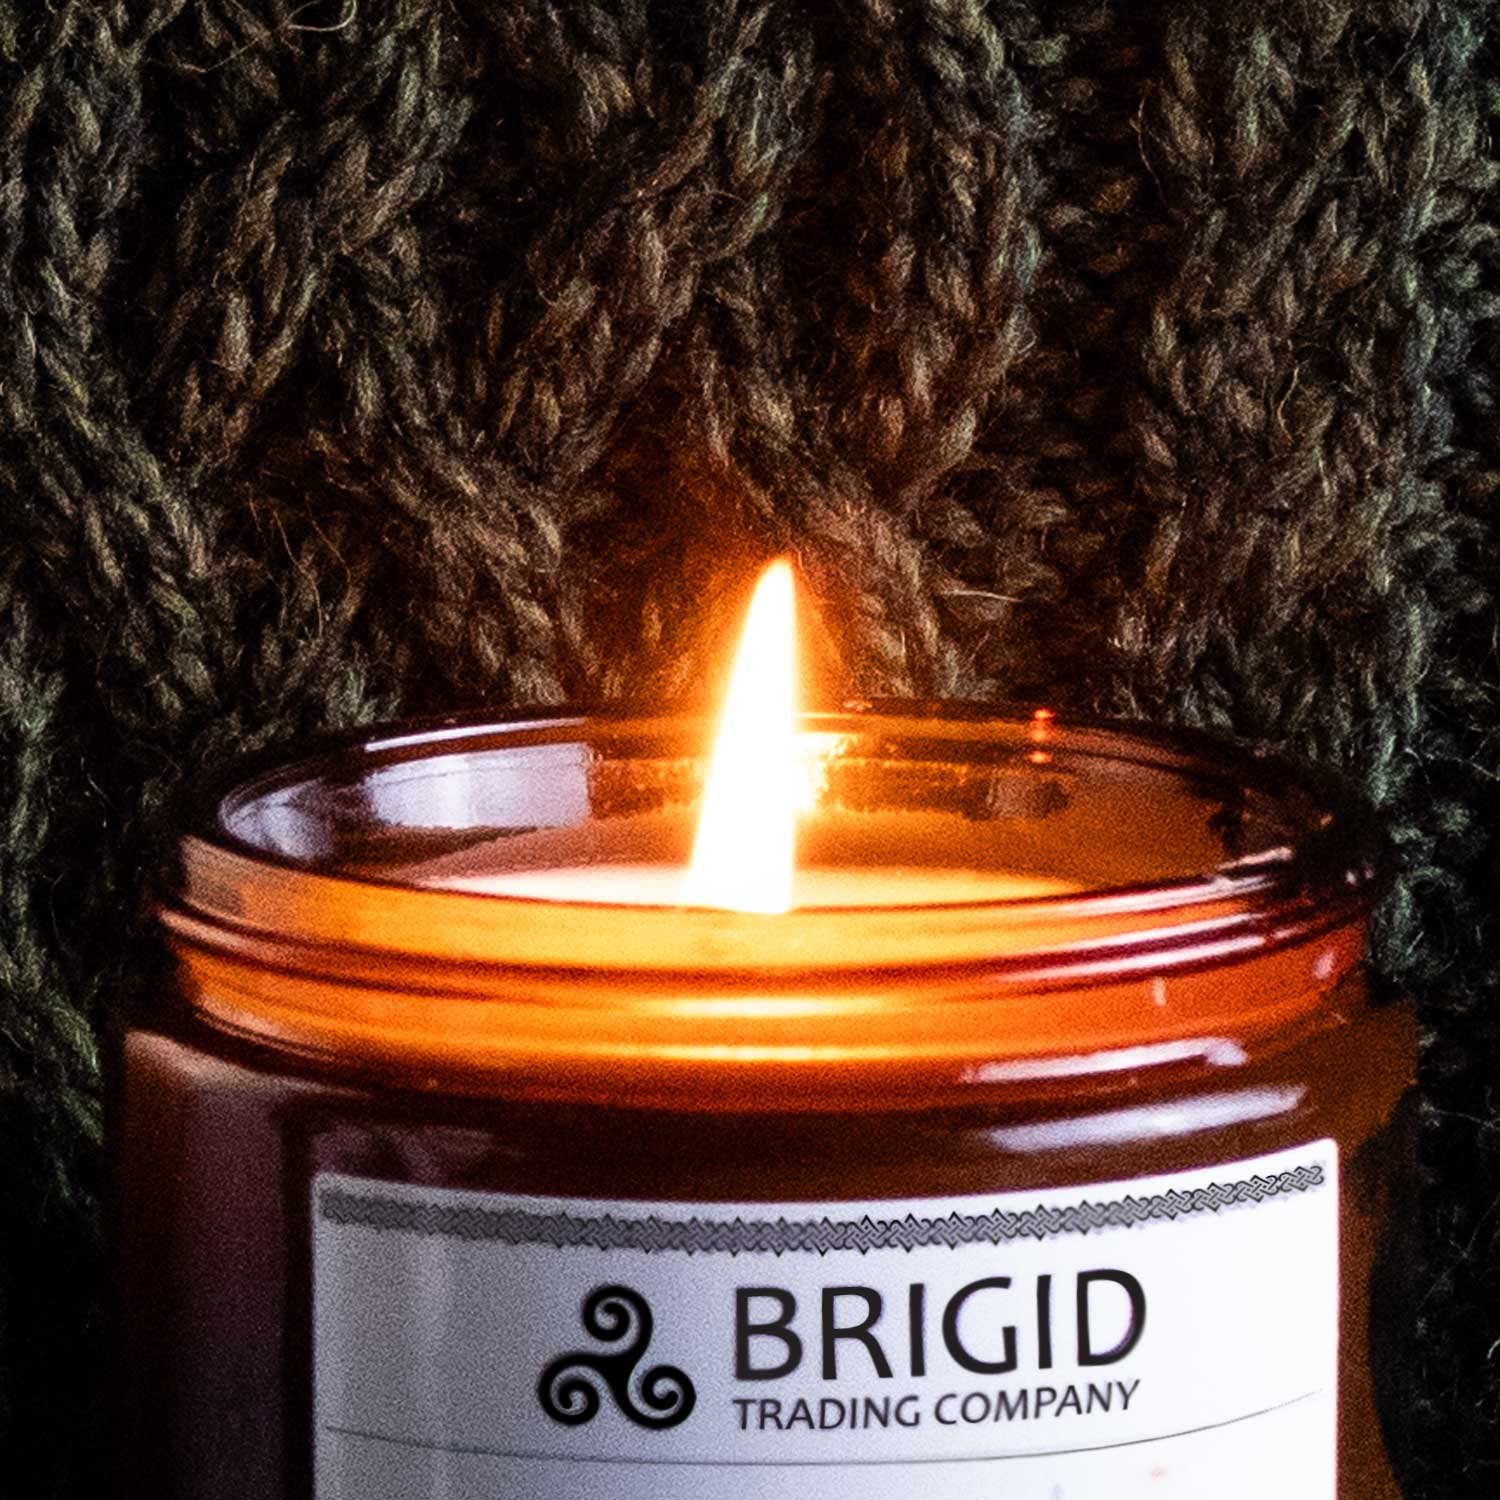 candle close up the candle collection aromatherapy and bougie parfume brigid trading company kitsap county washington state